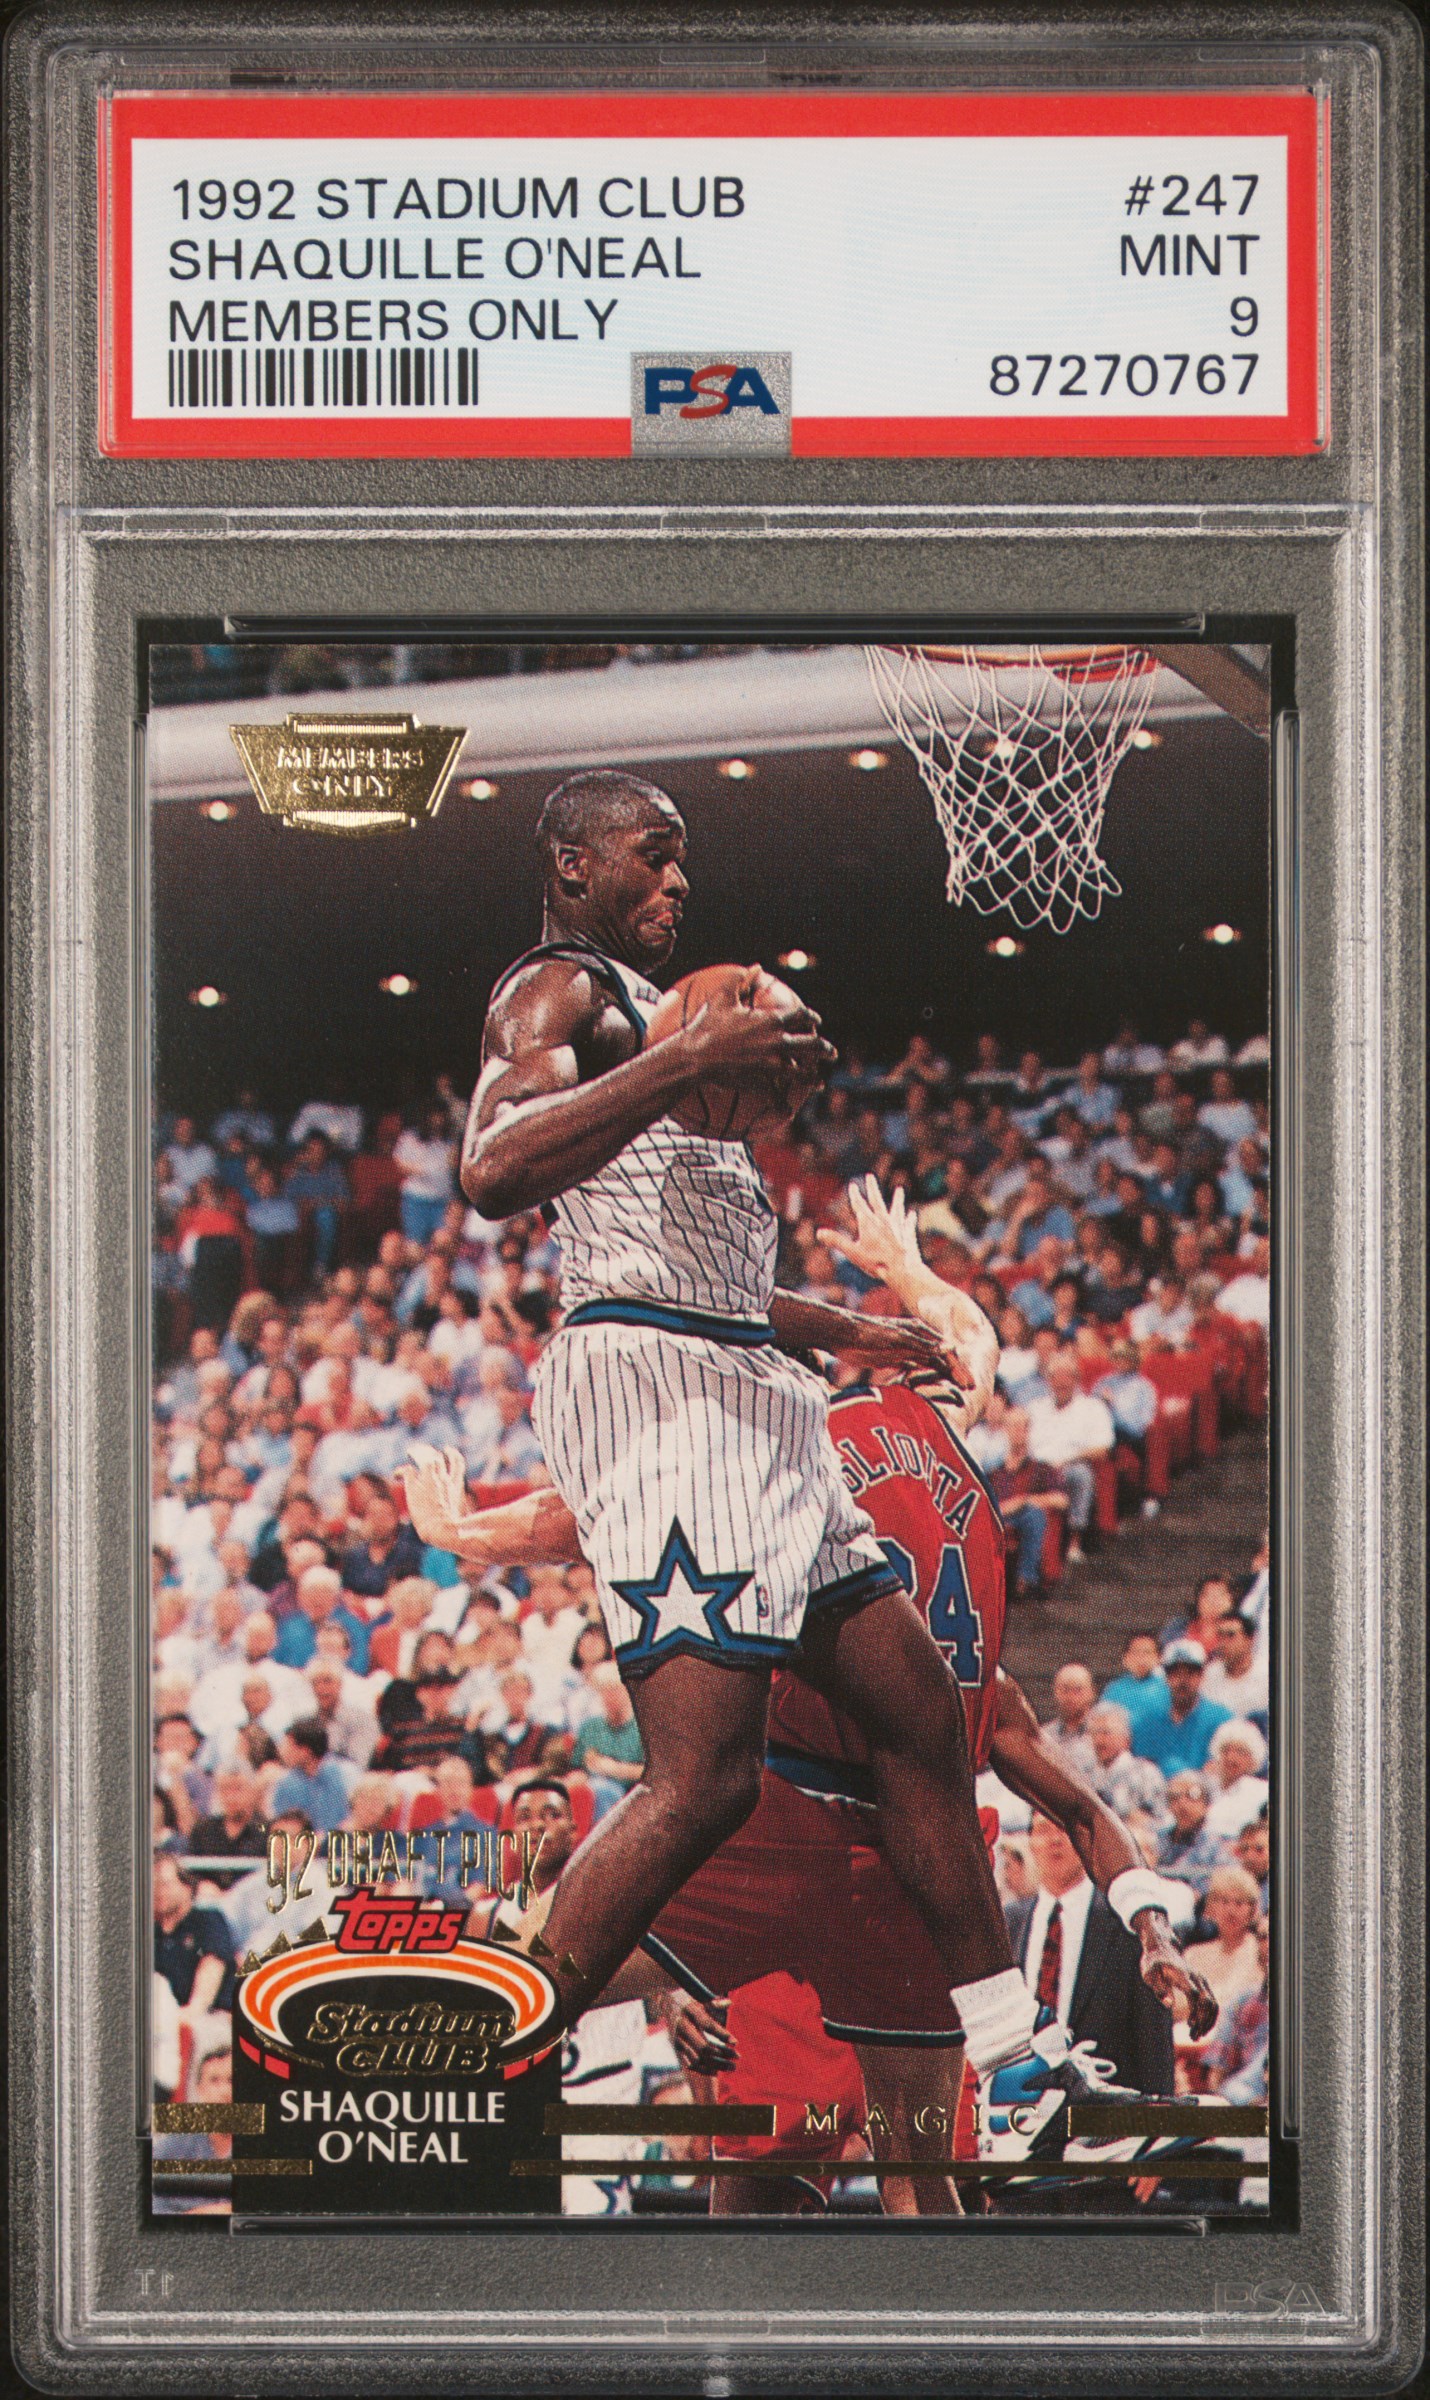 1992-93 Topps Stadium Club Members Only #247 Shaquille O'Neal Rookie Card – PSA MINT 9